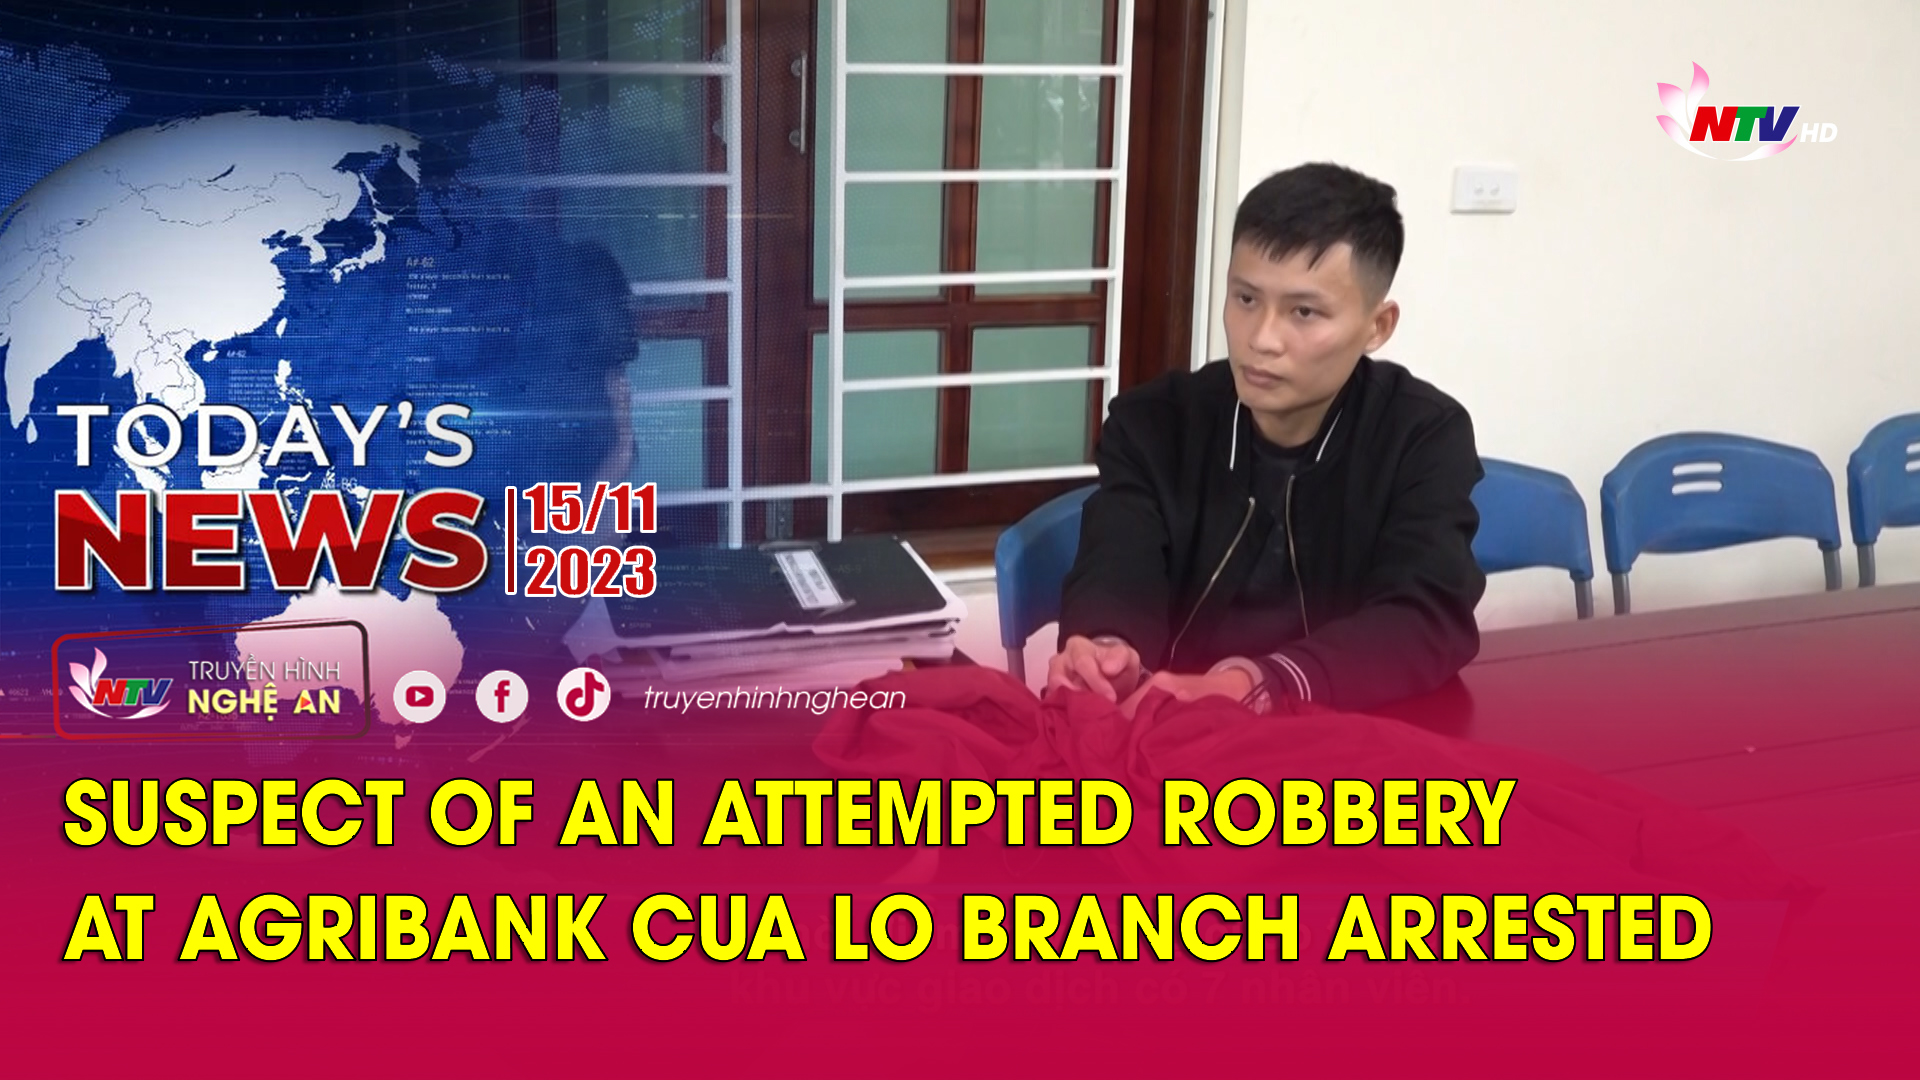 Today's News - 15/11/2023: Suspect of an attempted robbery at Agribank Cua Lo Branch arrested